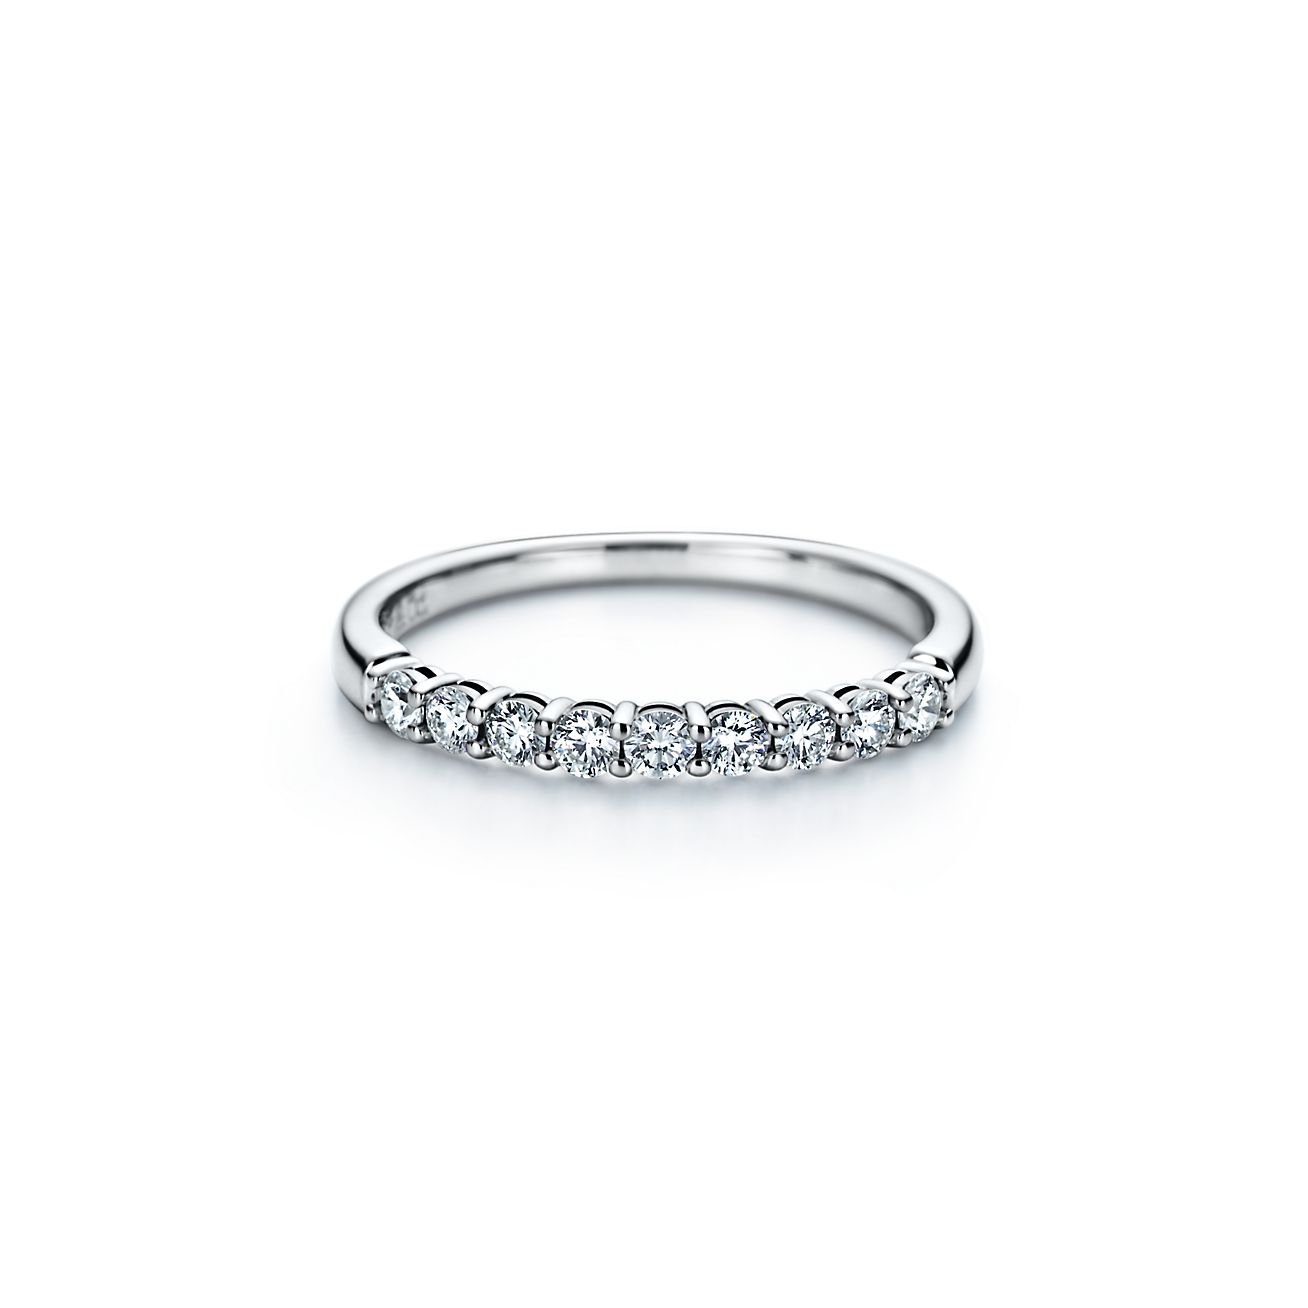 Tiffany Forever Band Ring in Platinum with a Half-circle of Diamonds, 2.2  mm | Tiffany & Co.